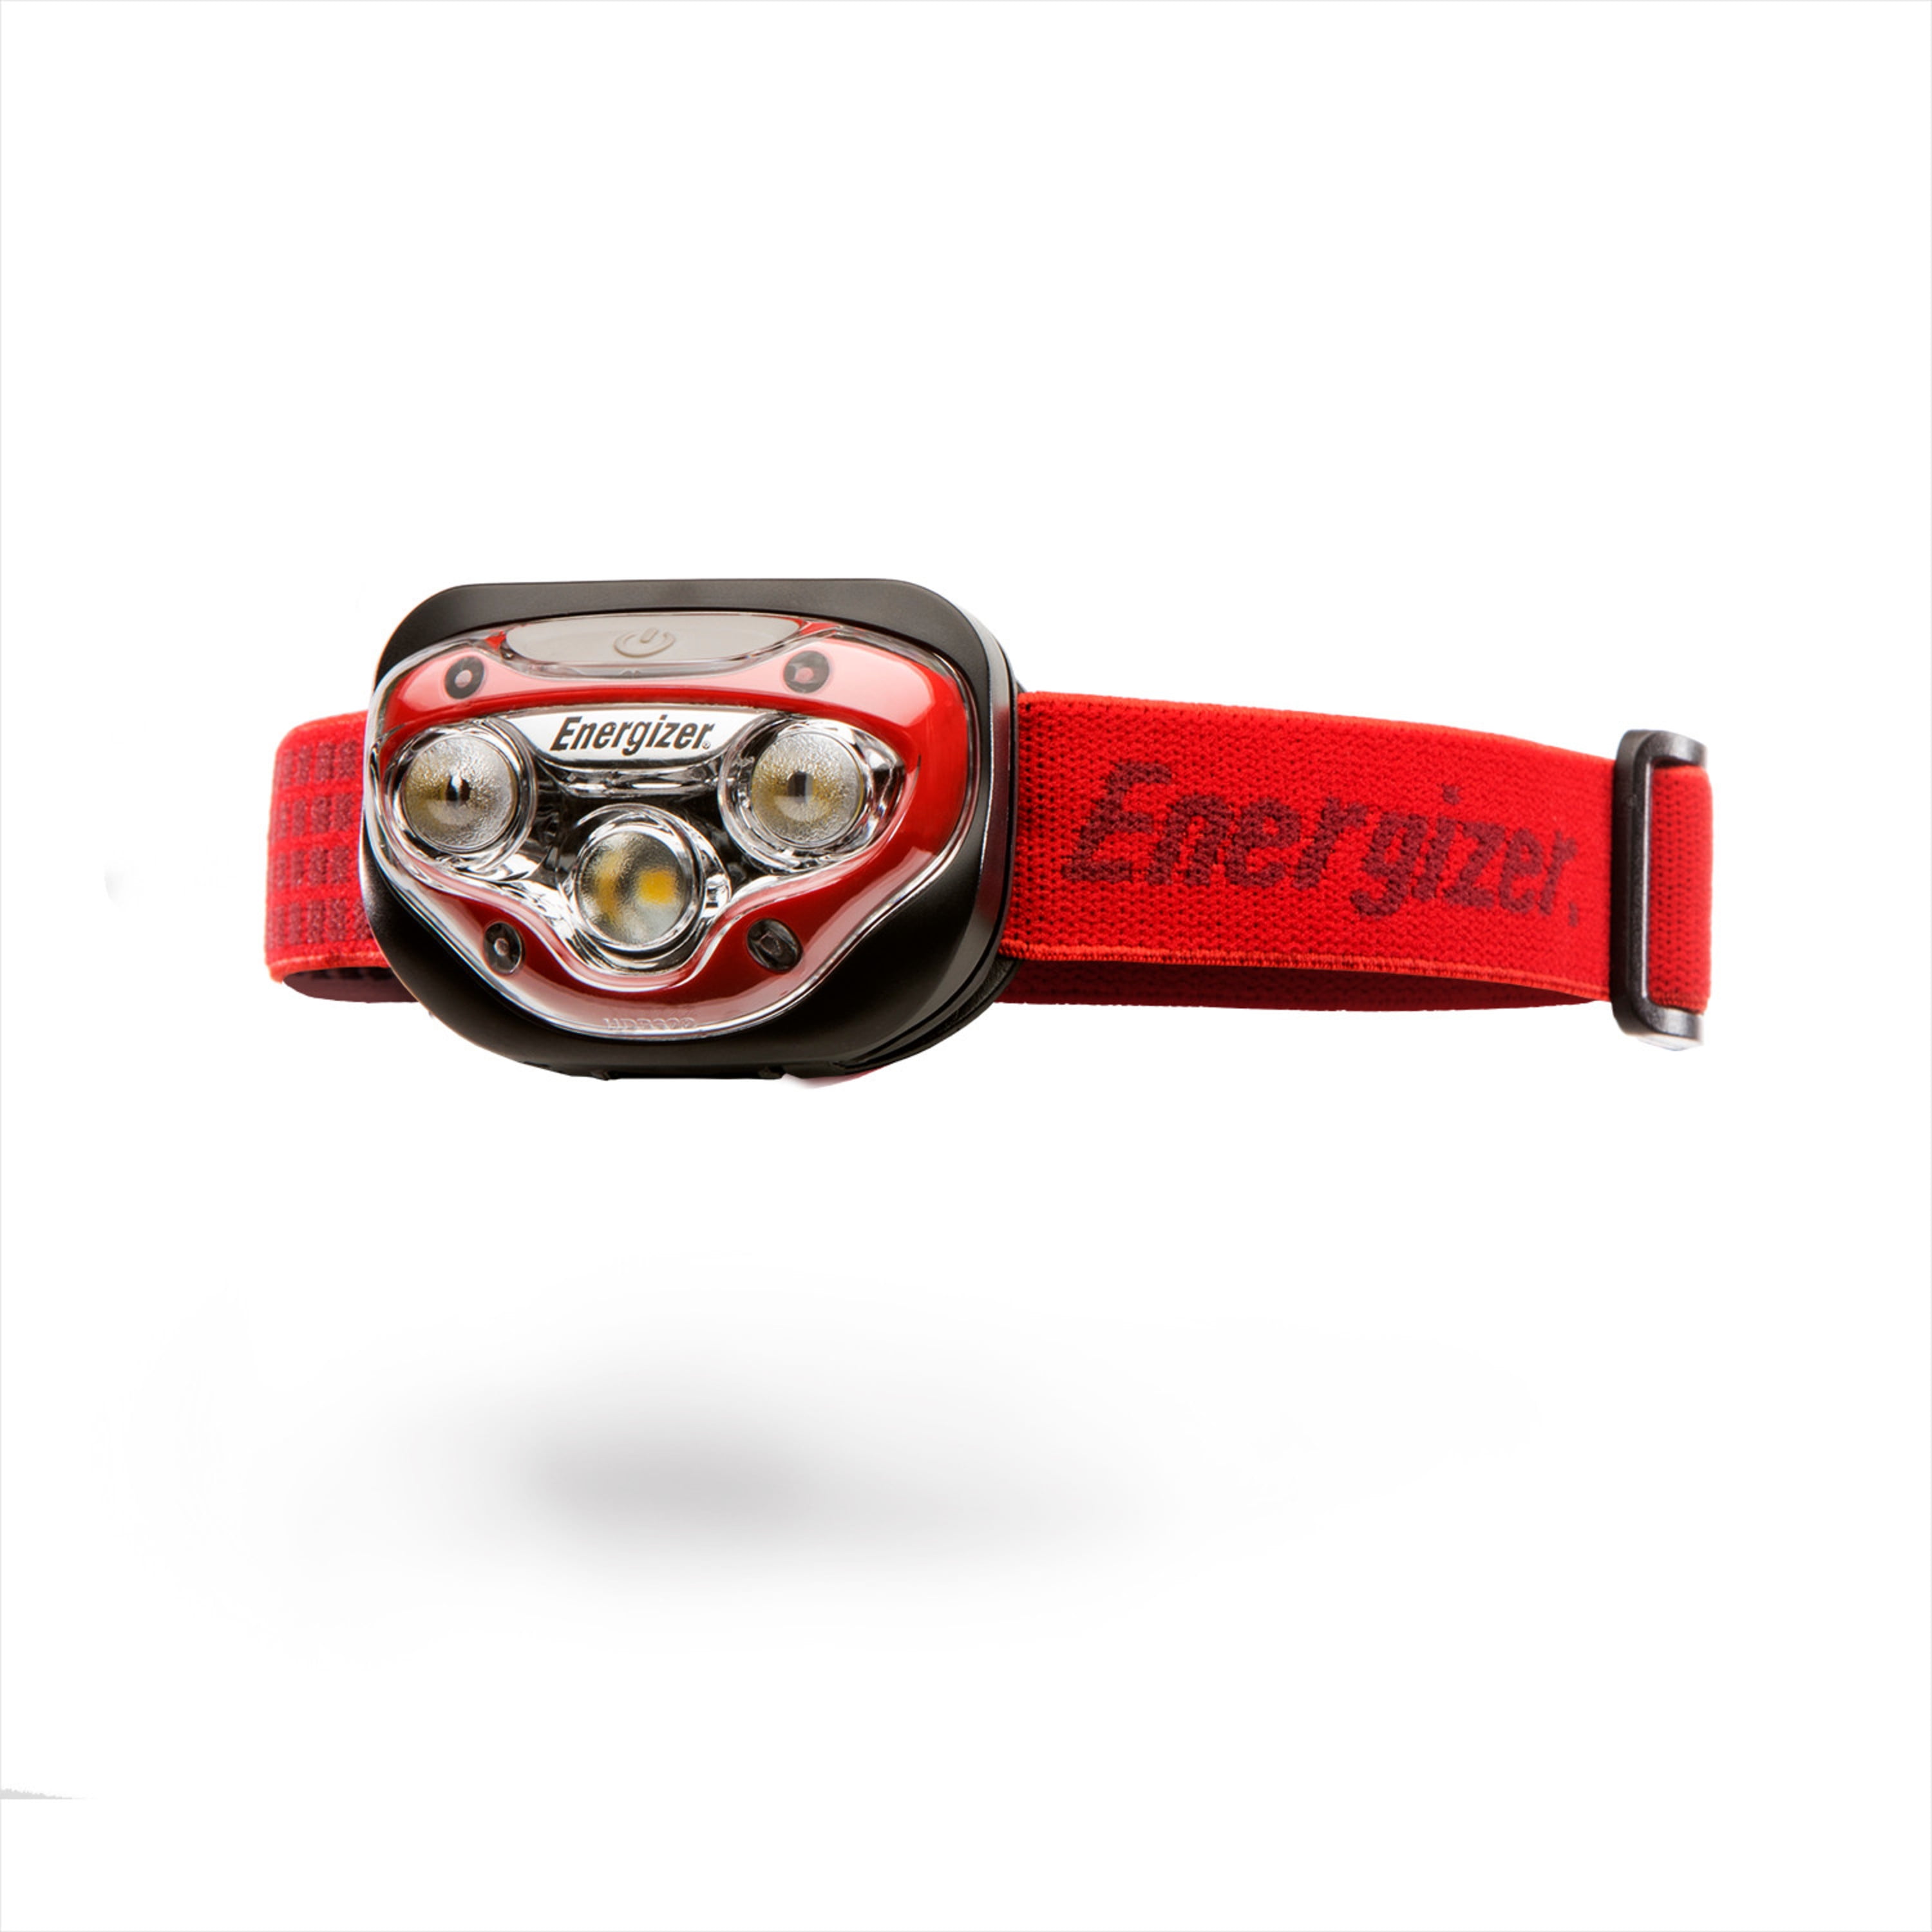 Focus Headlight with 3 x AAA Batteries Included Energizer Vision HD 